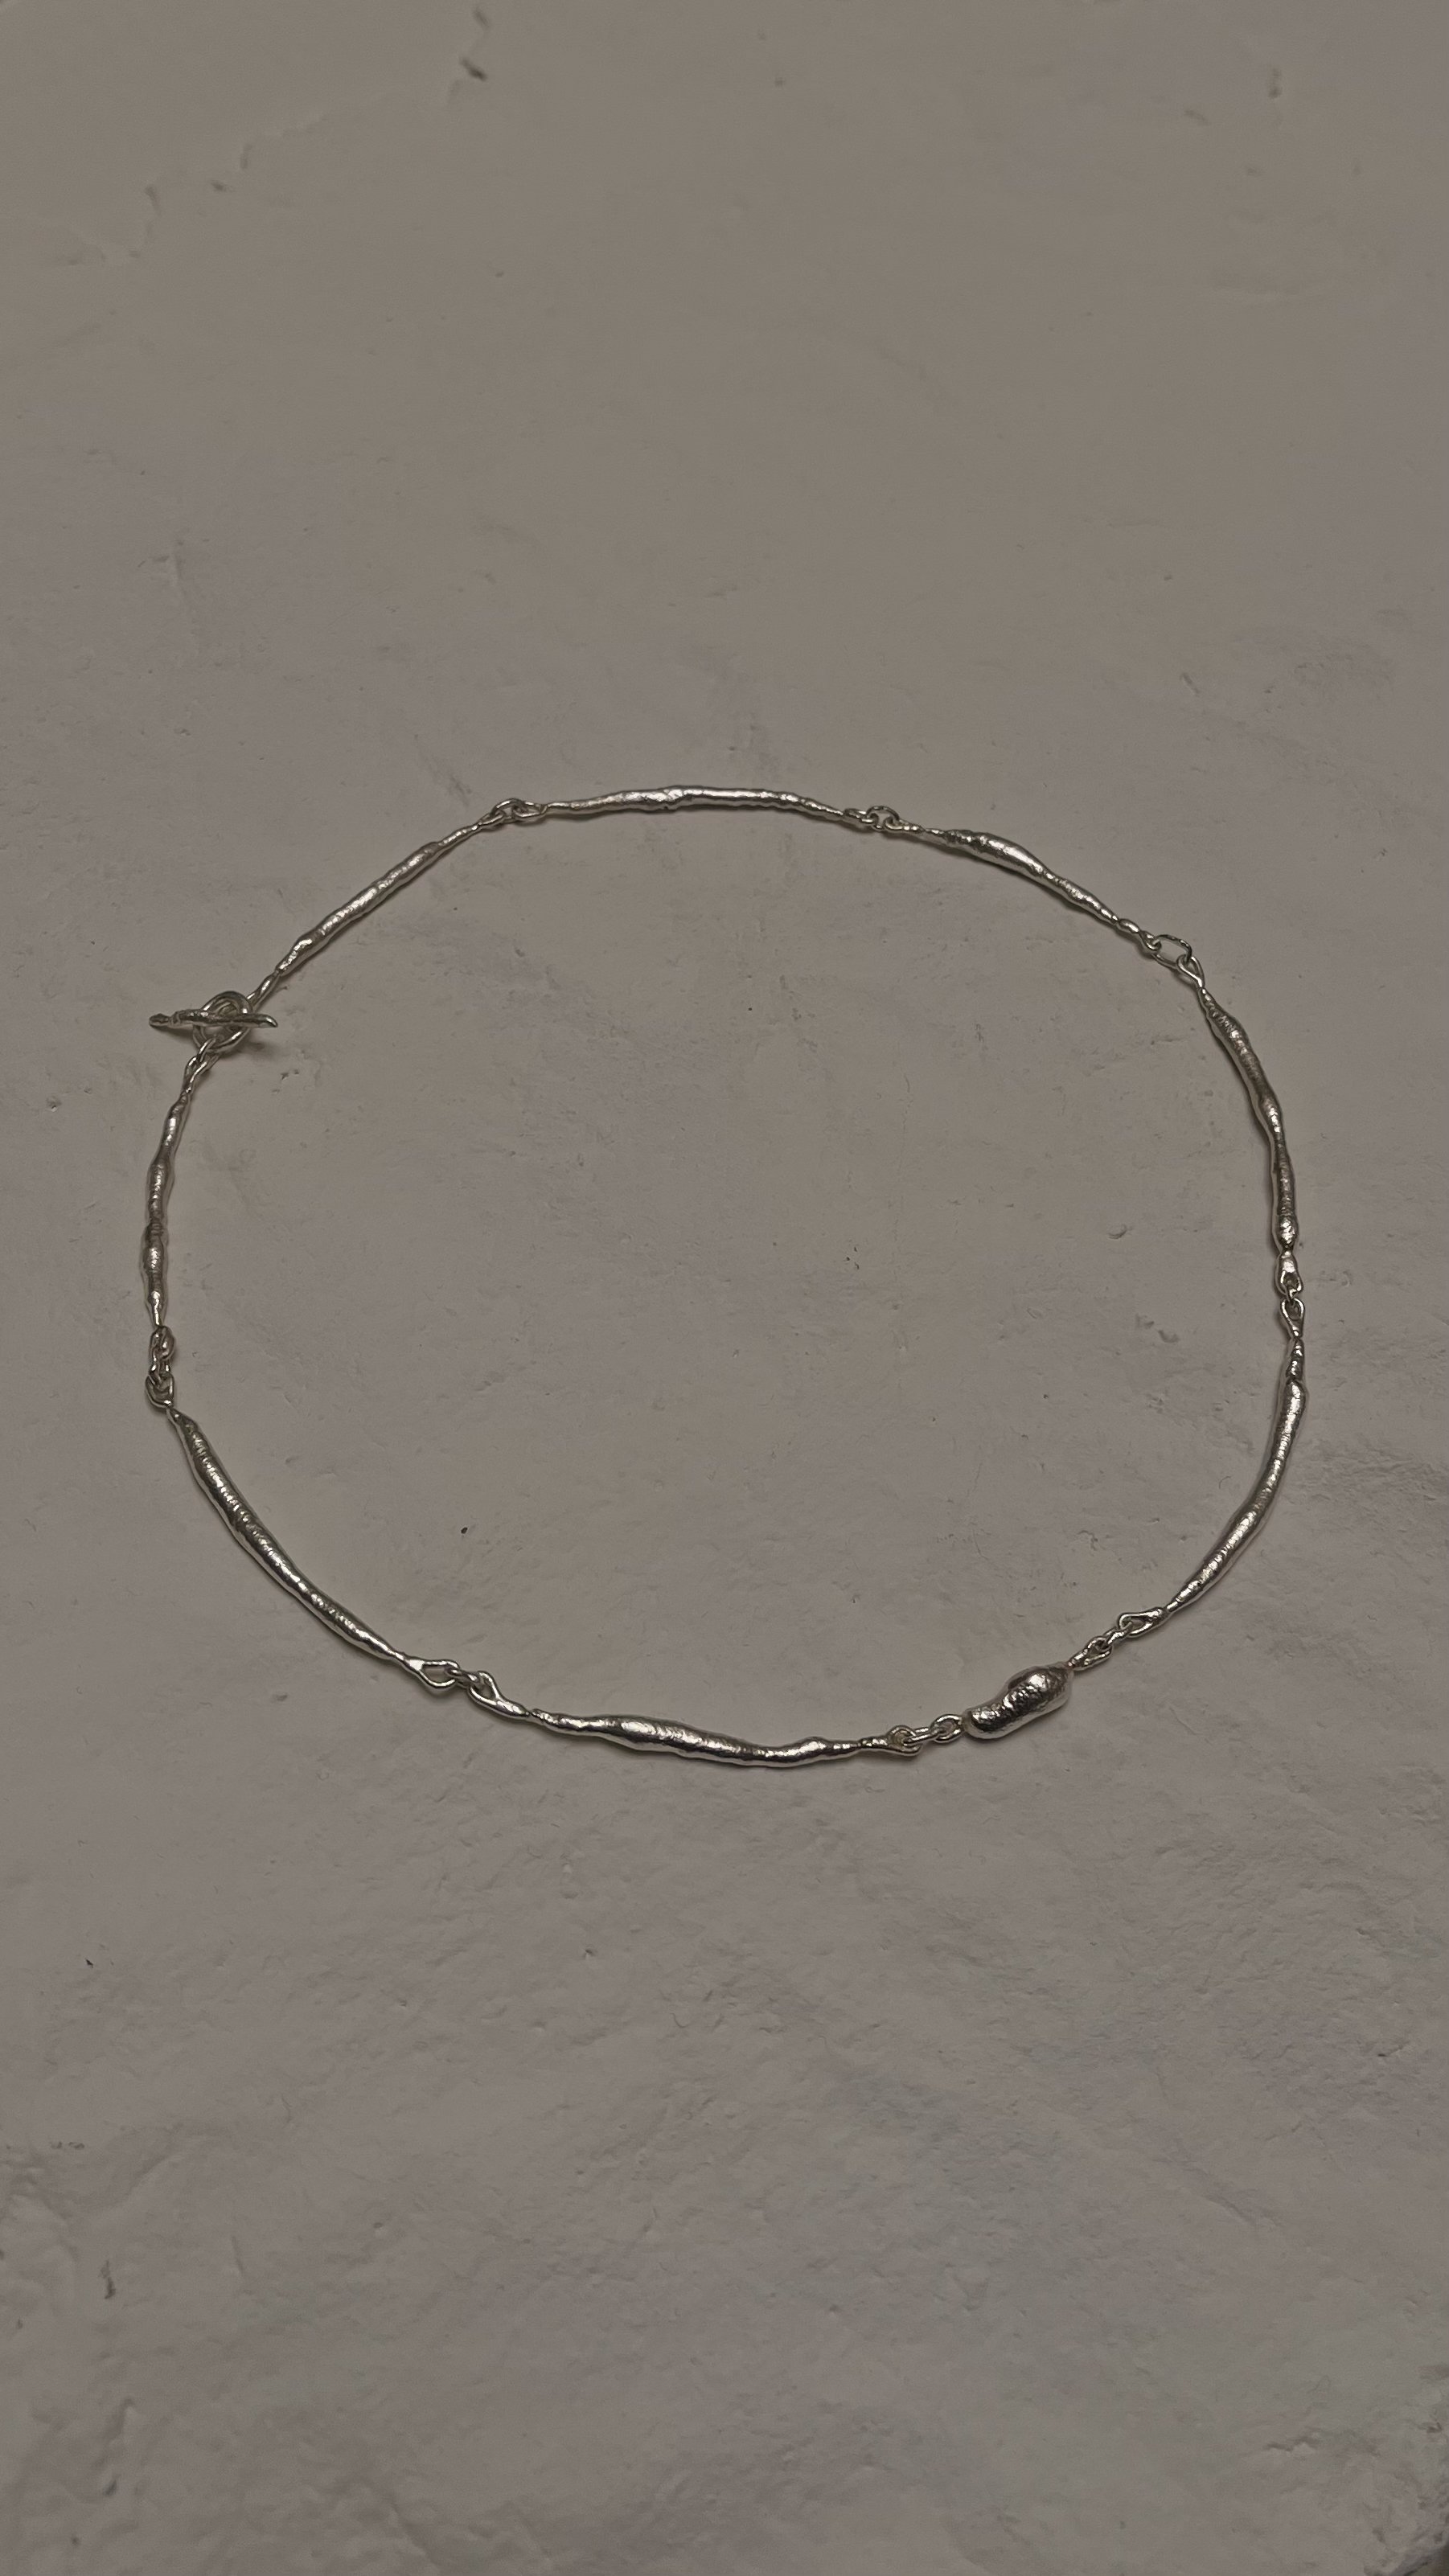 Image of Edition 4. Piece 17. Necklace